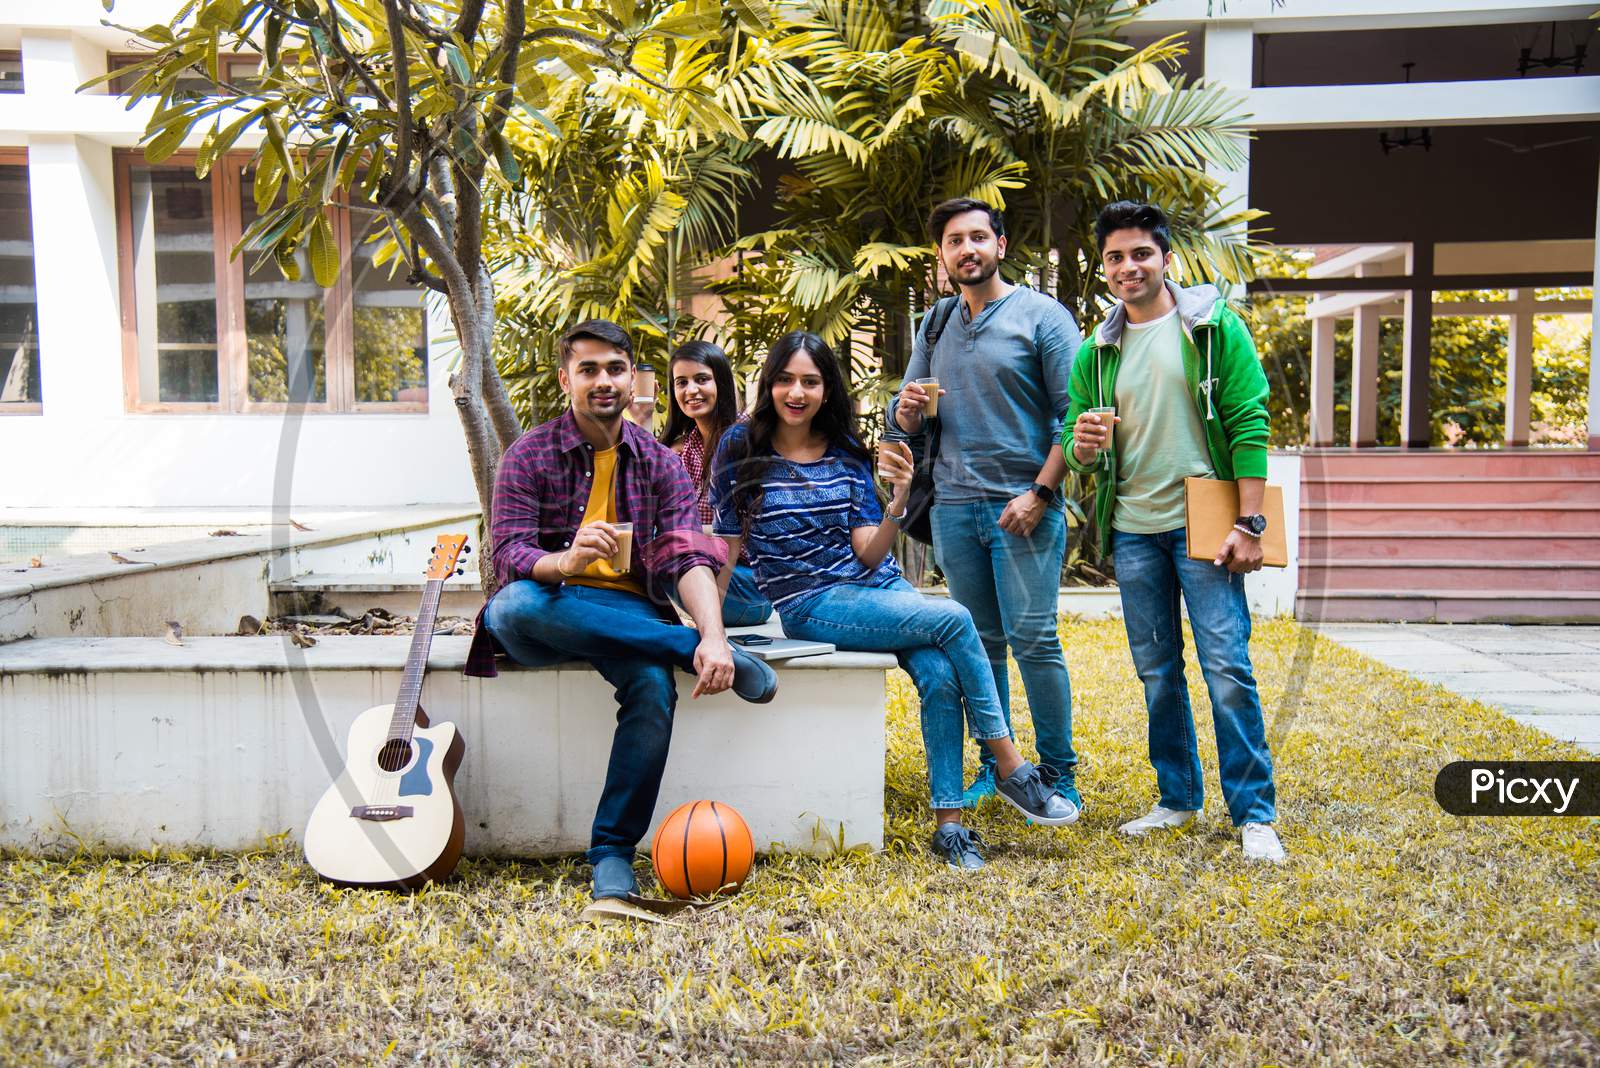 Indian University Students Having Tea Or Coffee In A Break In College Campus